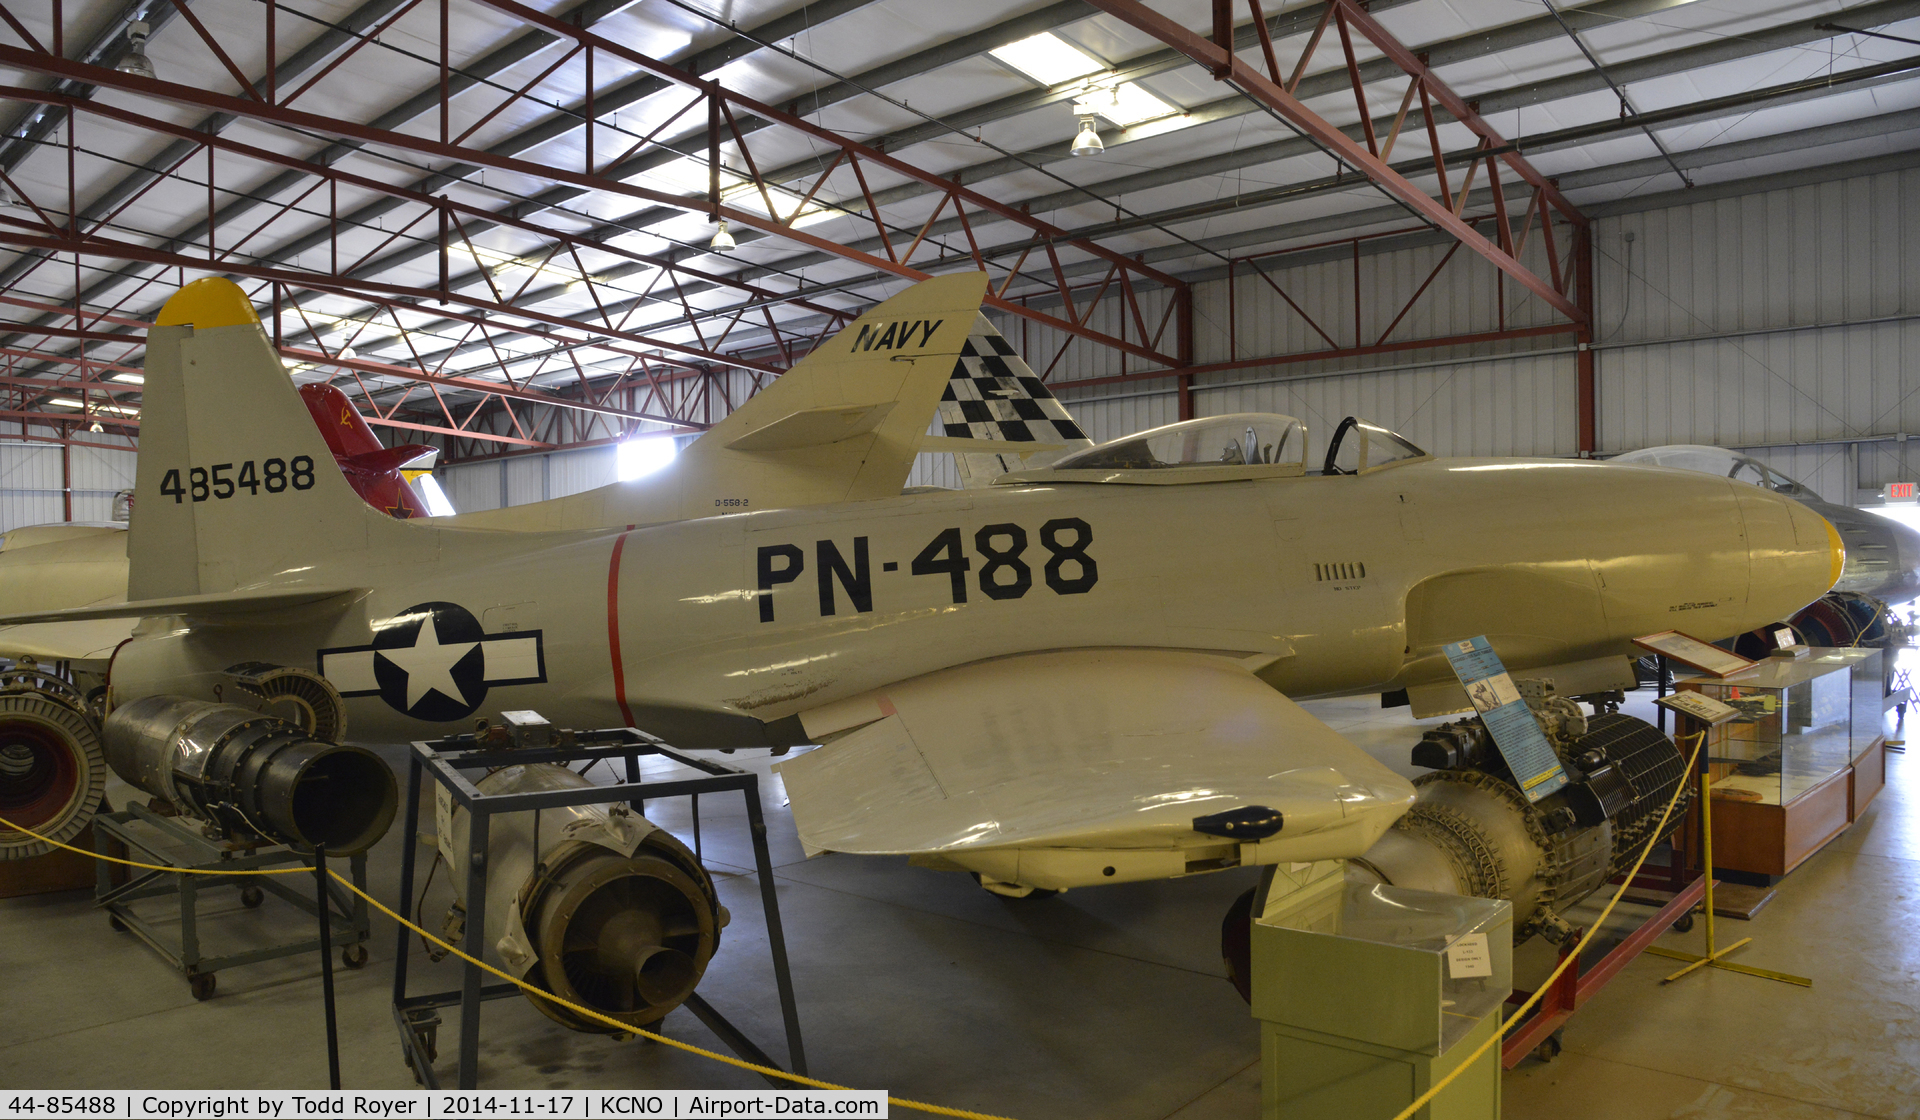 44-85488, Lockheed P-80A-5-LO Shooting Star C/N 080-1511, On display at the Planes of Fame Chino location